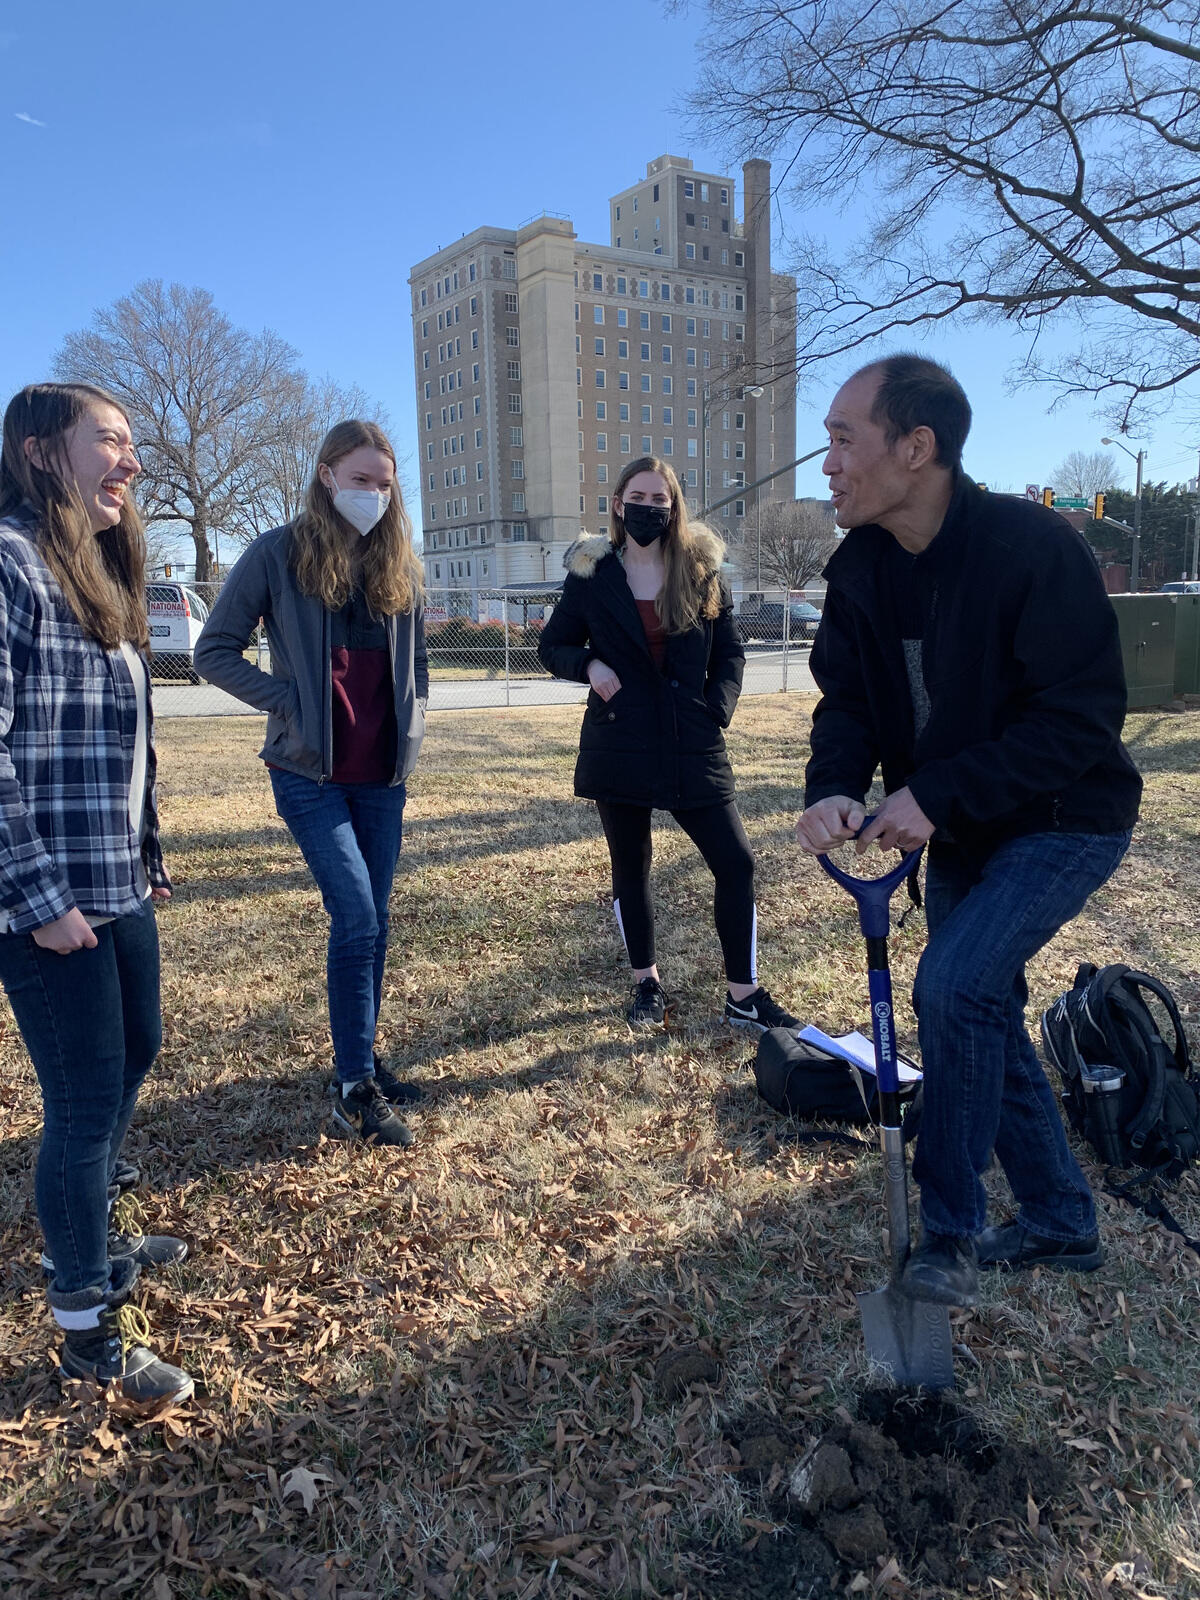 From left, students Emma Gregory, Alexandra Almasy, and Tara Macintosh share a laugh with their professor Stephen Fong, Ph.D., as Fong digs into the ground in front of the Science Museum of Virginia.